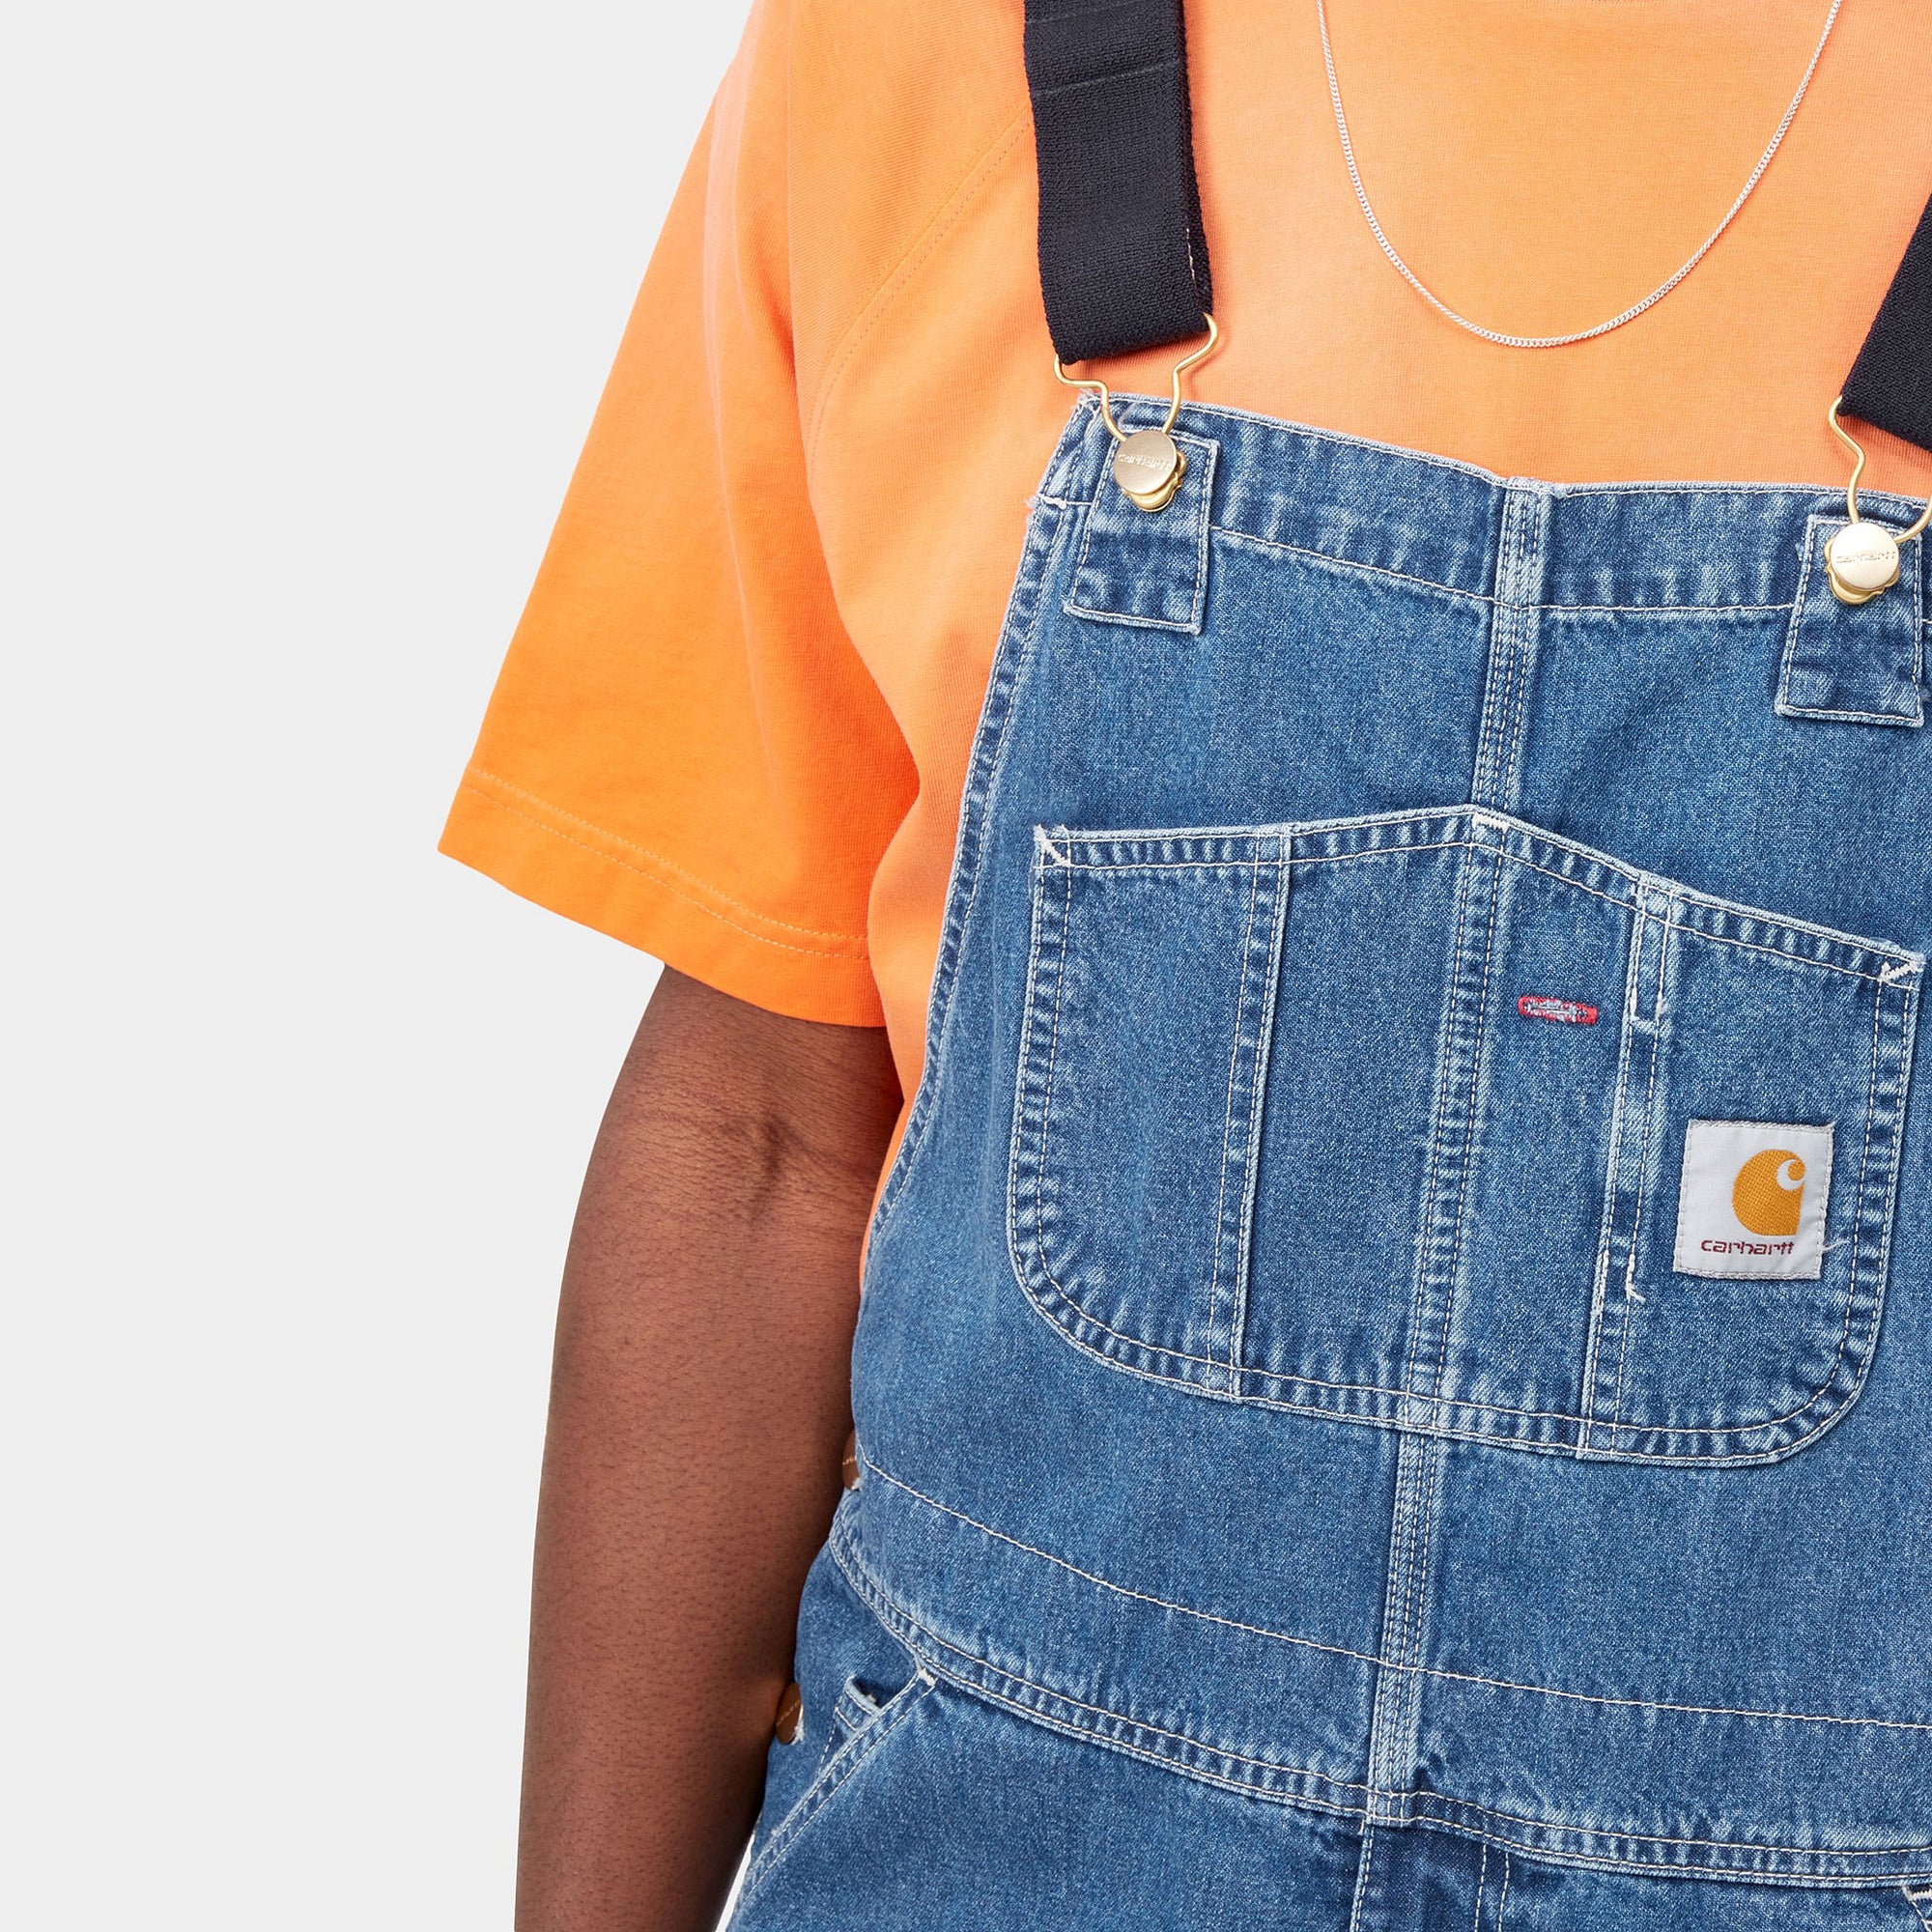 BIB OVERALL - Blue (stone washed)